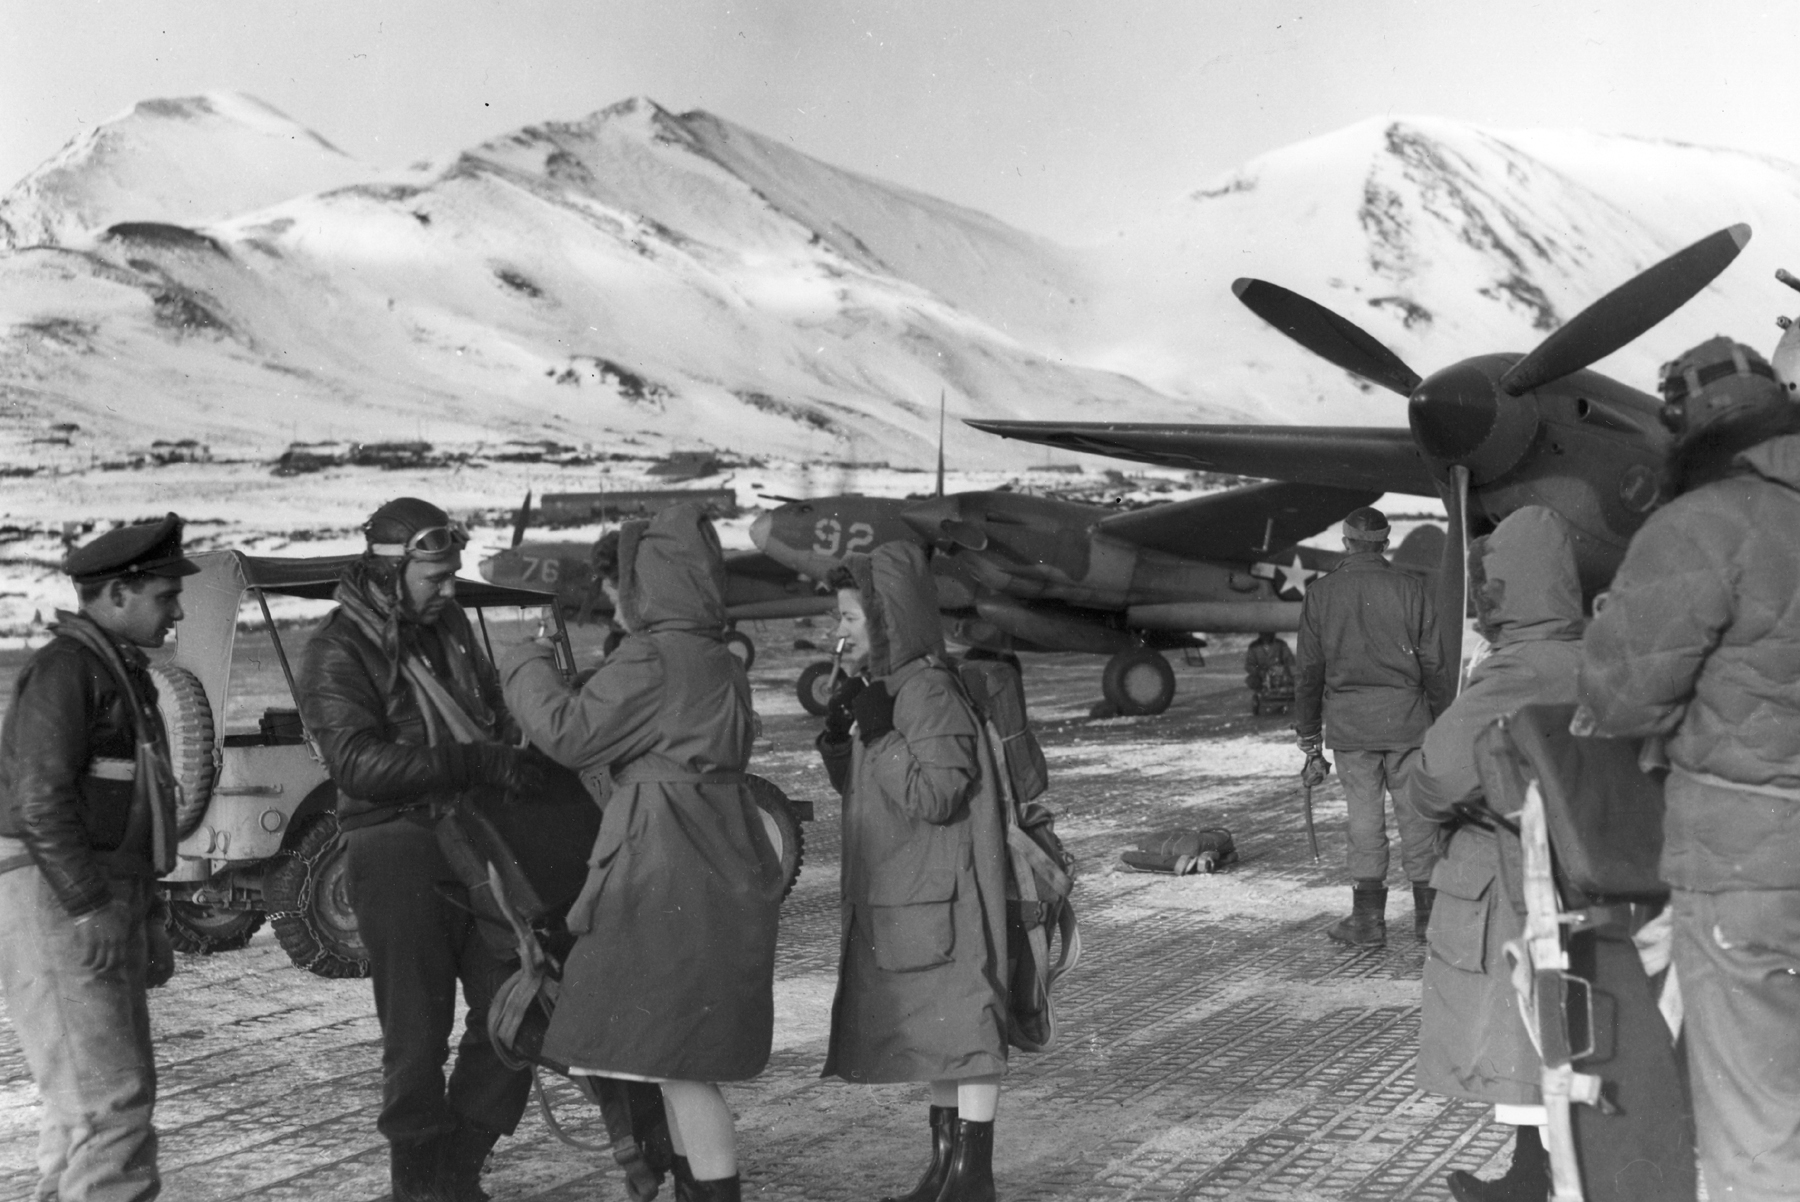 Members of the USAAF 54th Fighter Squadron with some Army nurses at Attu Island, 1943-44. Note P-38 Lightning aircraft.